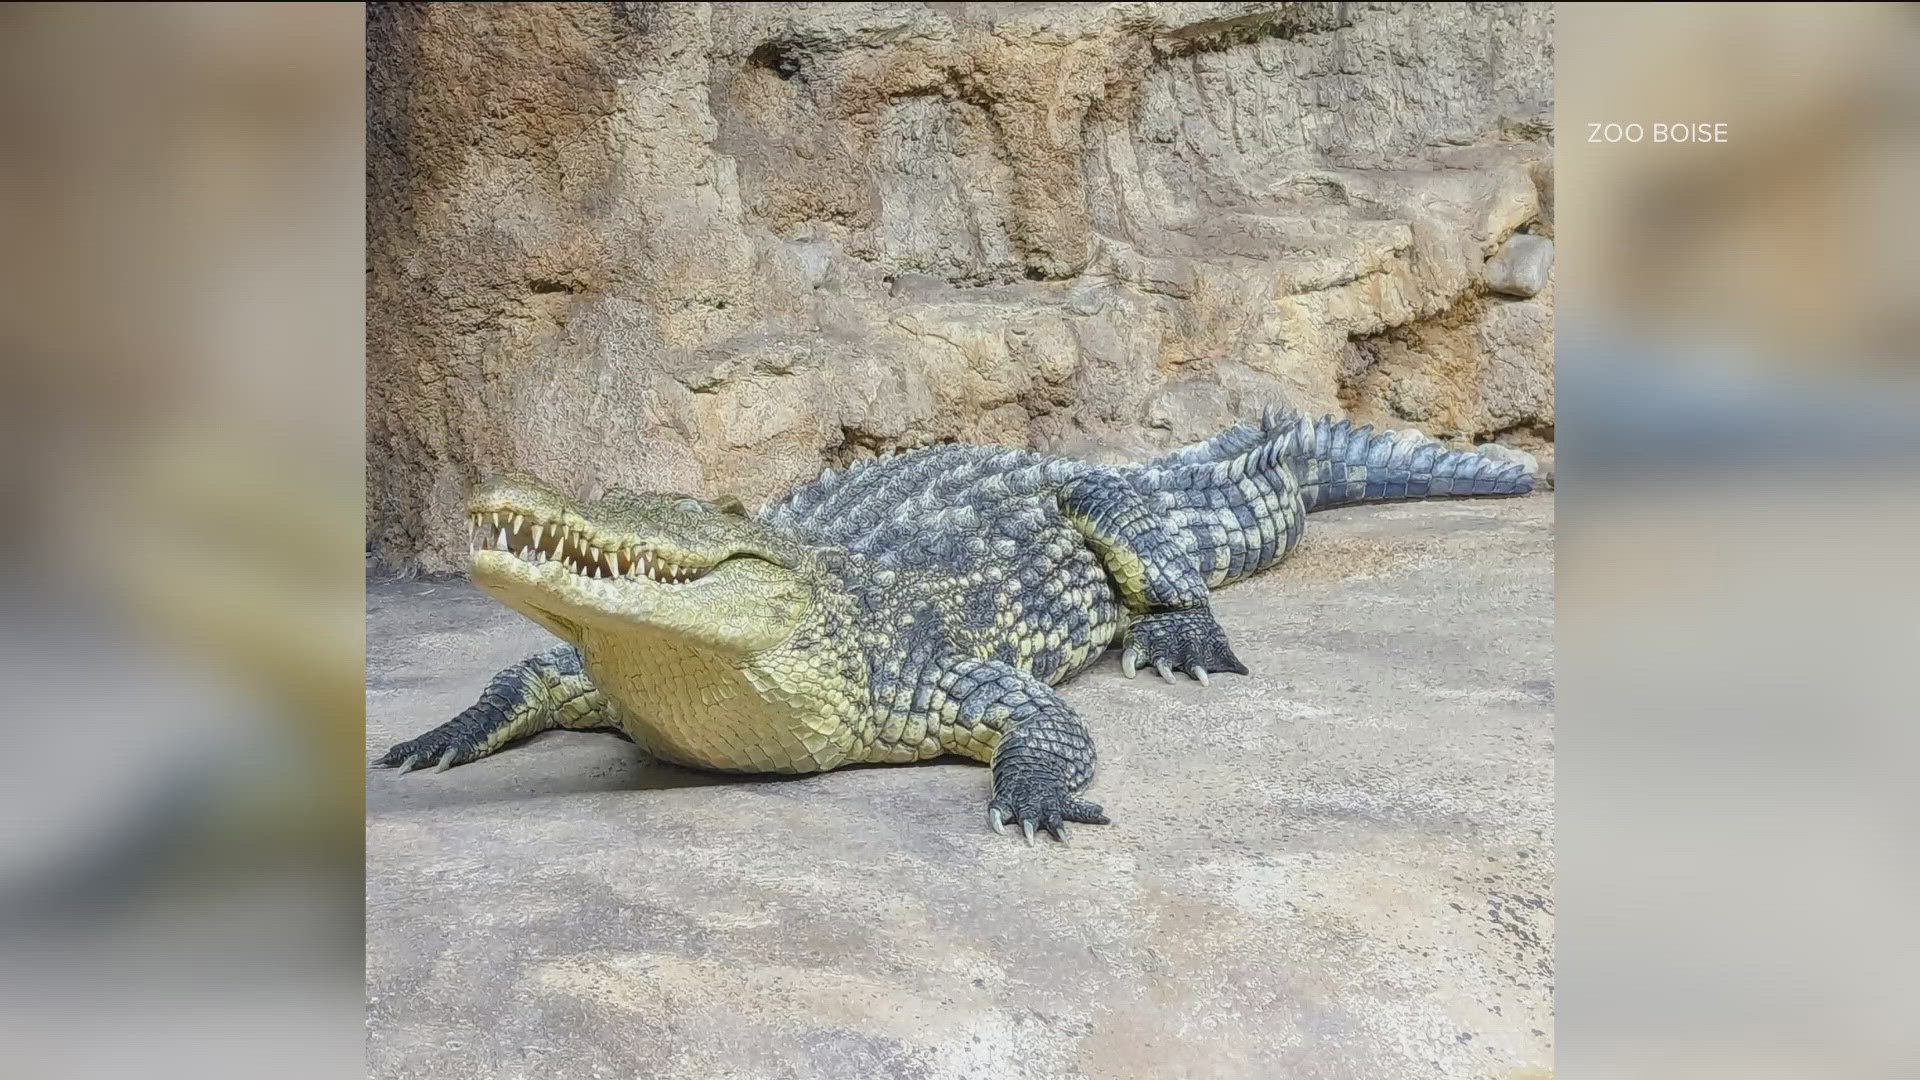 Ready to croc? The zoo snapped a toothy pic of Pandora, a Nile crocodile.